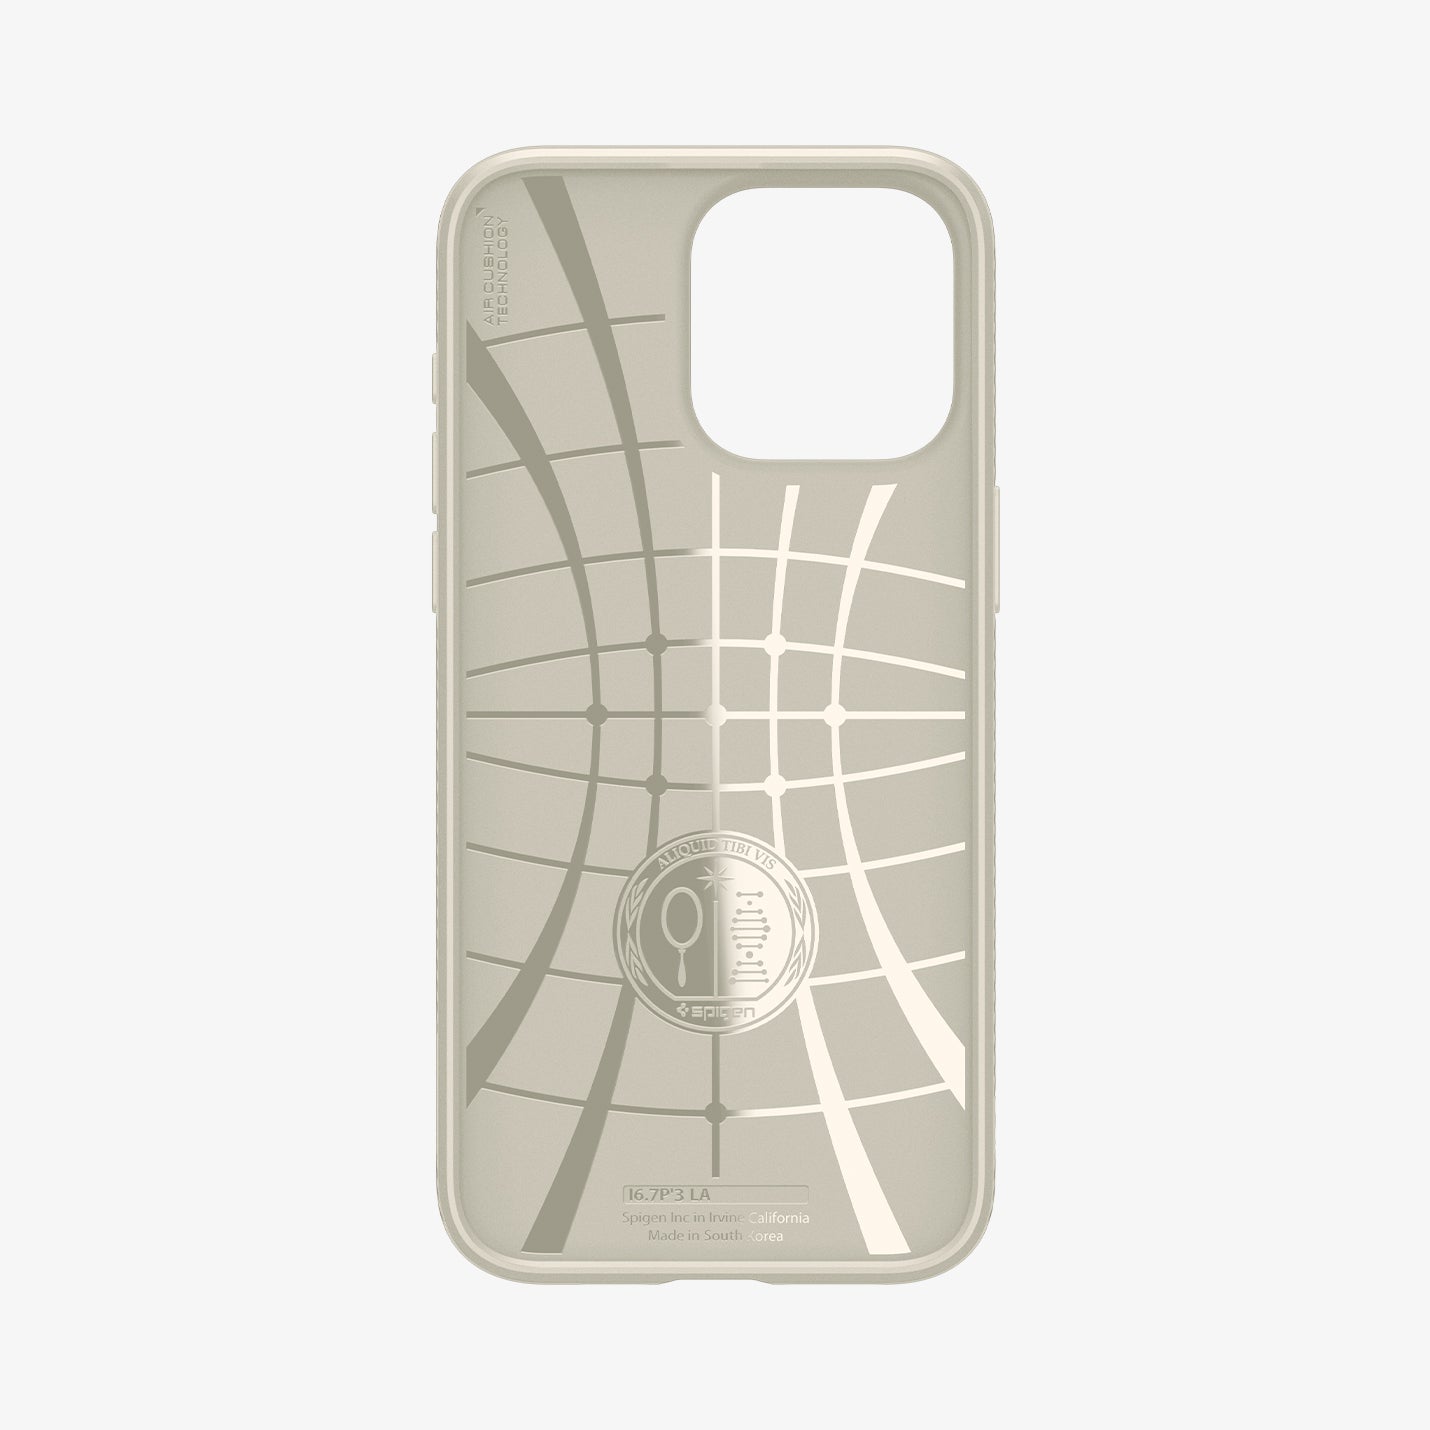 ACS07212 - iPhone 15 Pro Max Case Liquid Air in Natural Titanium showing the inner case with spider web pattern